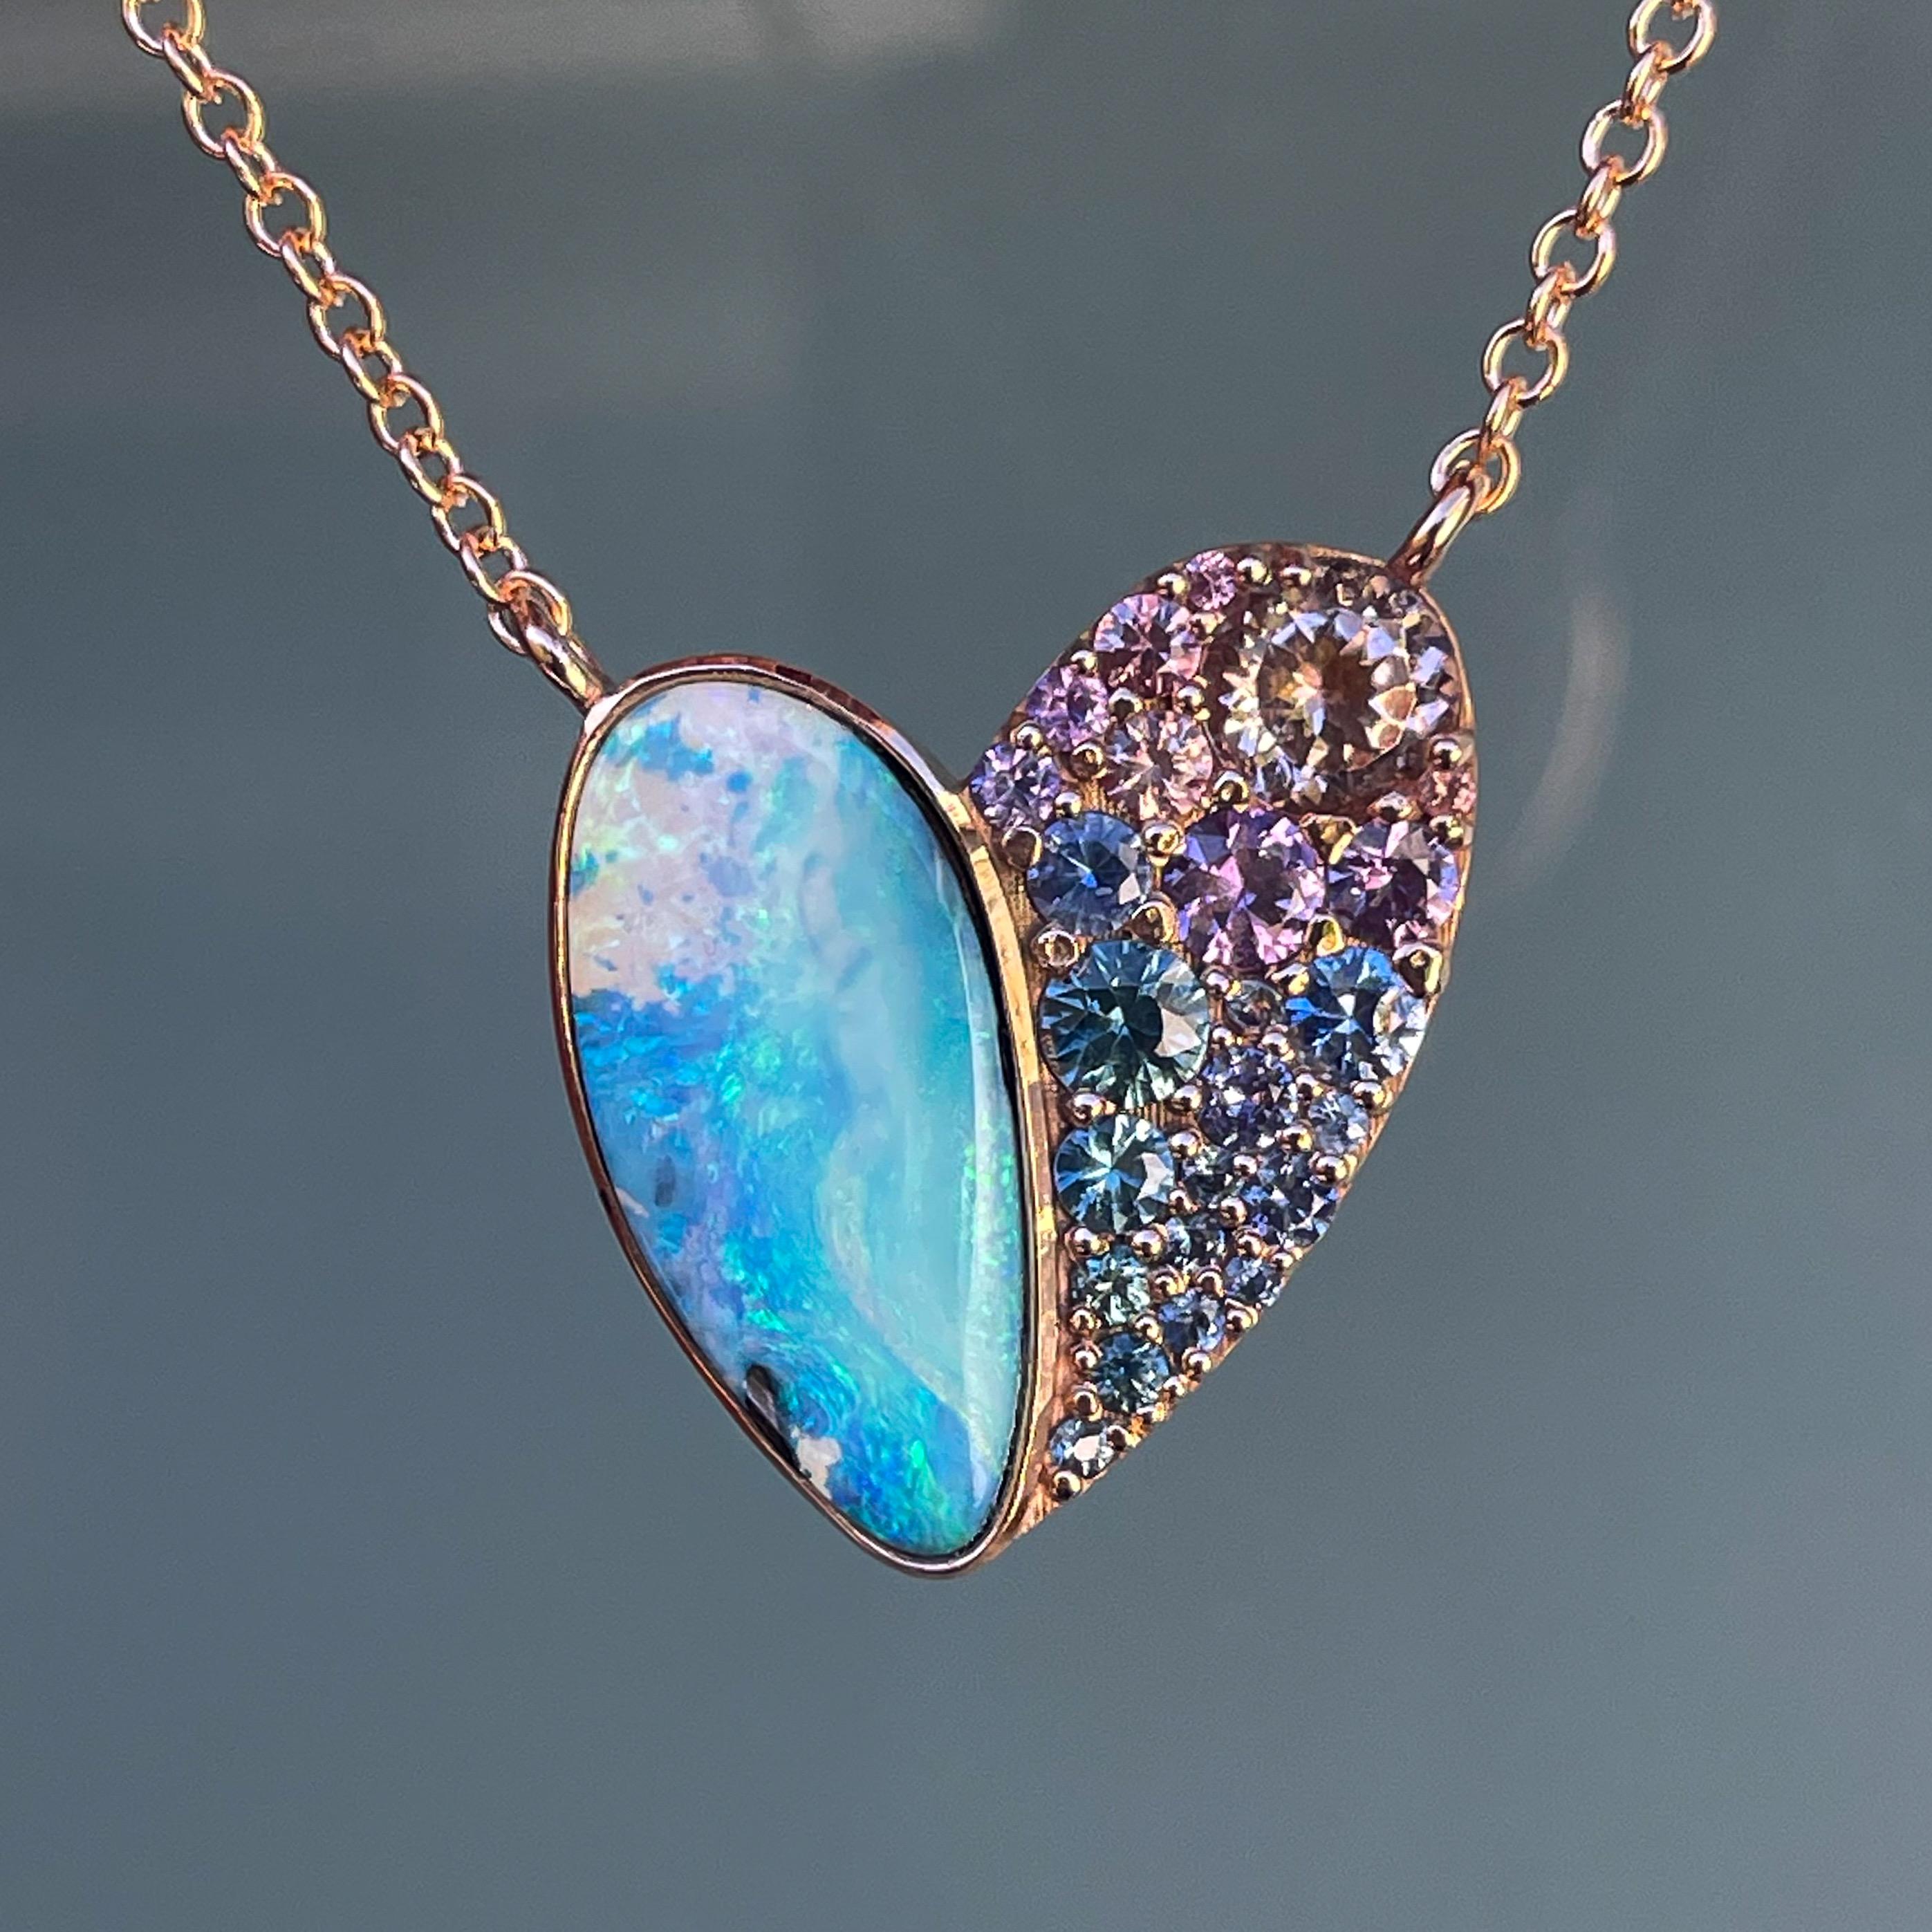 NIXIN Jewelry Cobbled Heart Opal Necklace with Sapphires in 14k Rose Gold 2